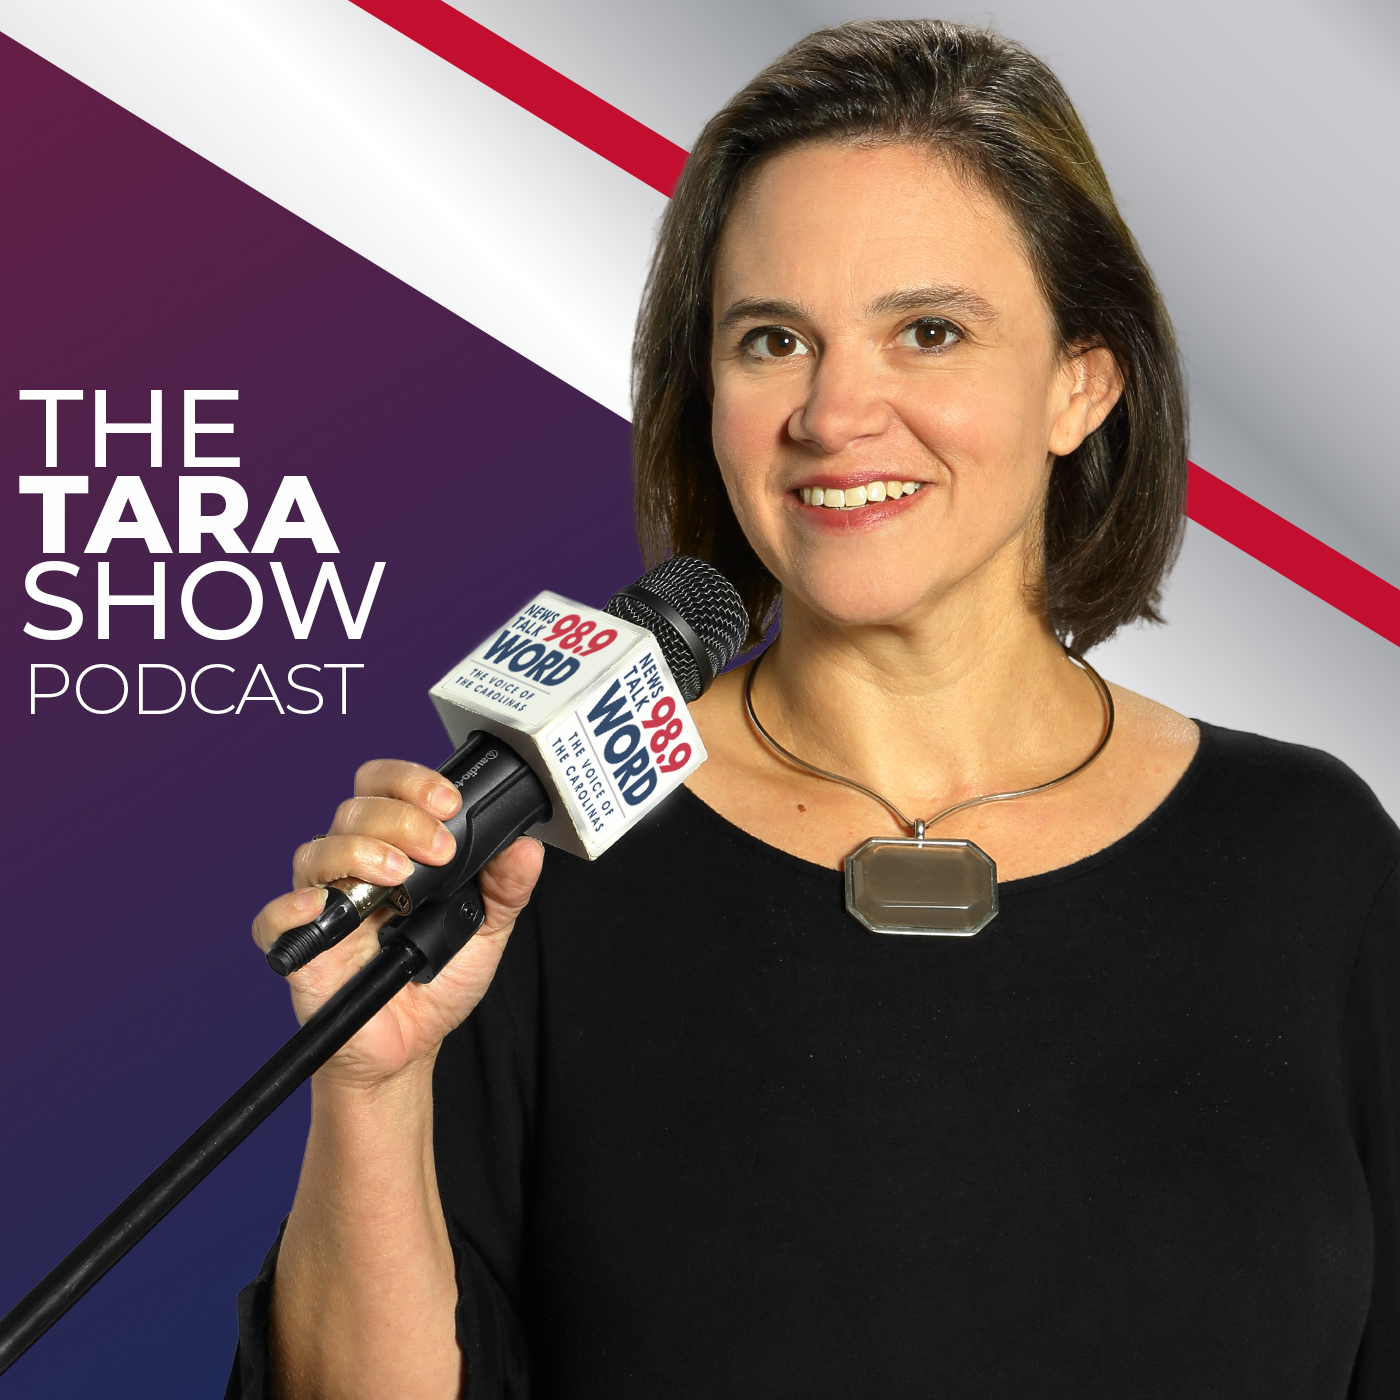 Hour 2: The Tara Show - “The Rise Technology with Lee and Ryan” “Down the Middle, the New Conservative” “Democrat's Cringey Vote Farming” “The Ominous “They” who Control Biden”